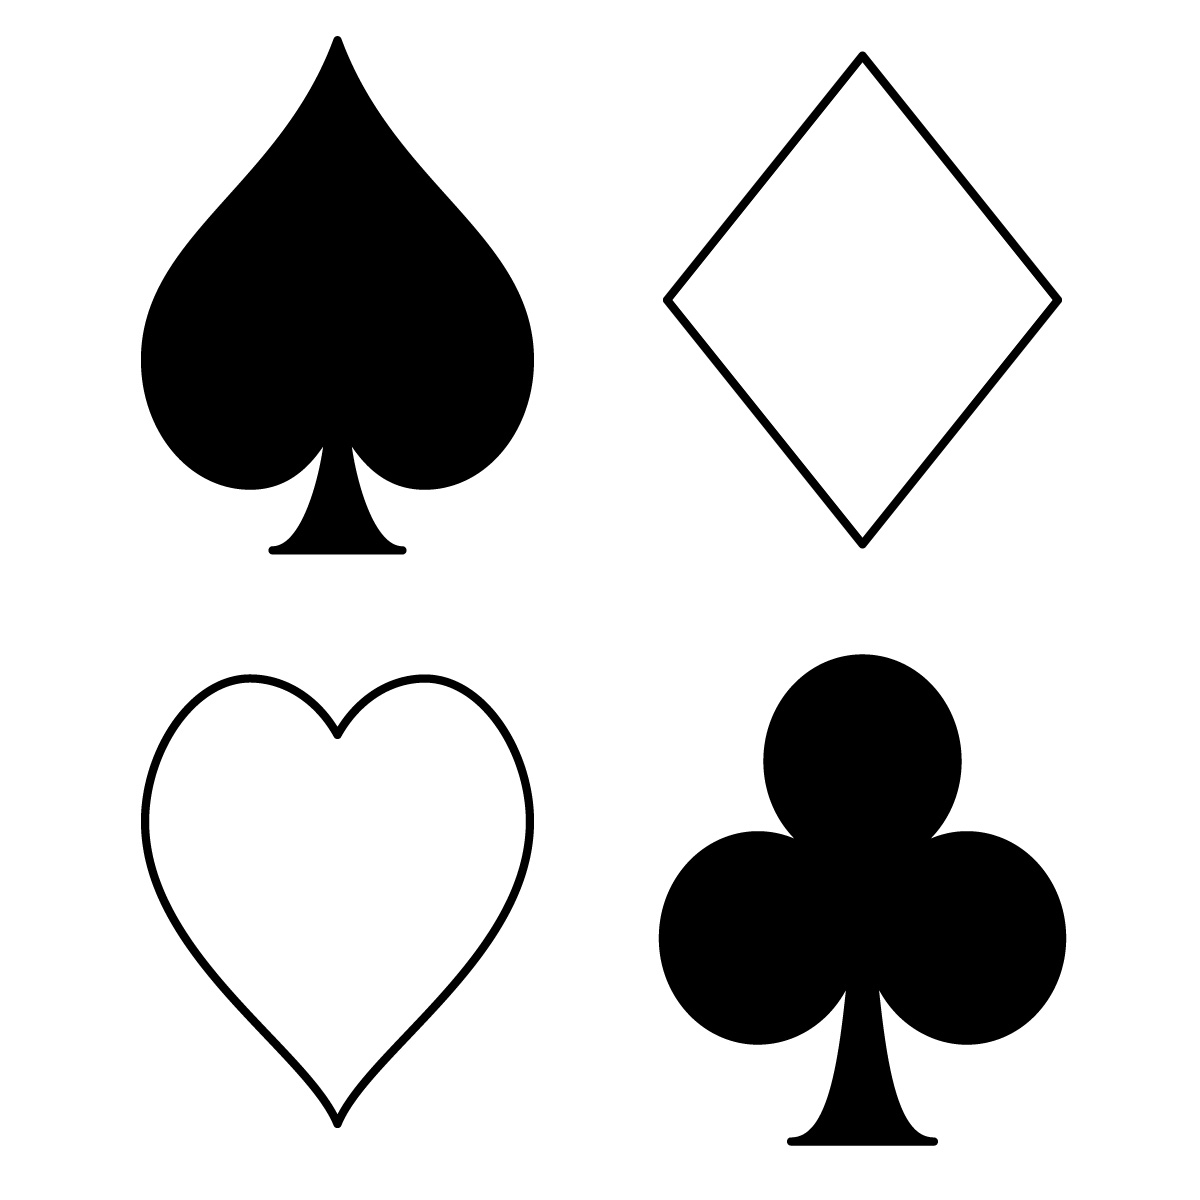 images-for-playing-cards-clubs-clipart-best-clipart-best-clip